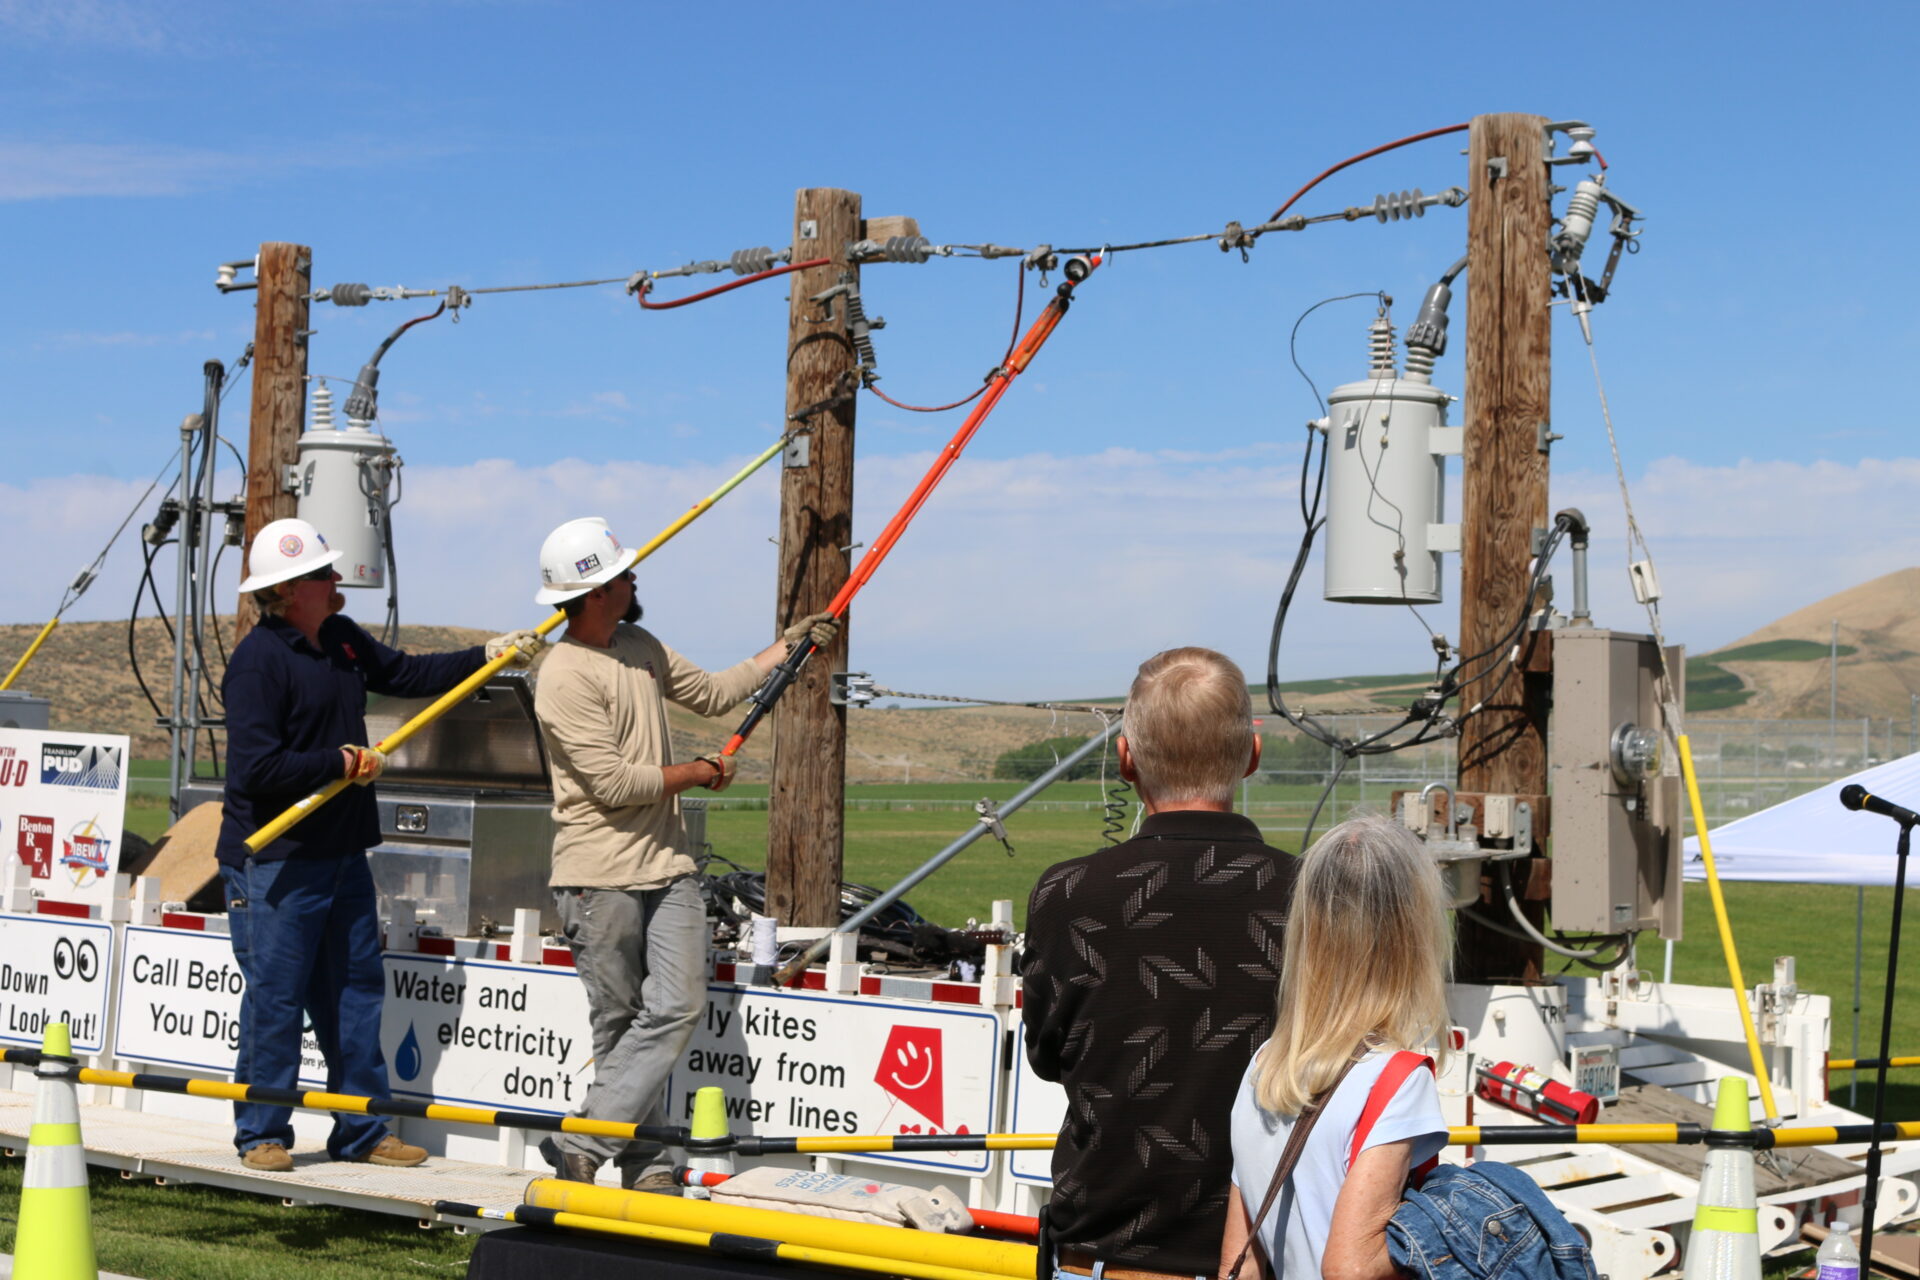 Life-size electrical safety demonstration trailer.